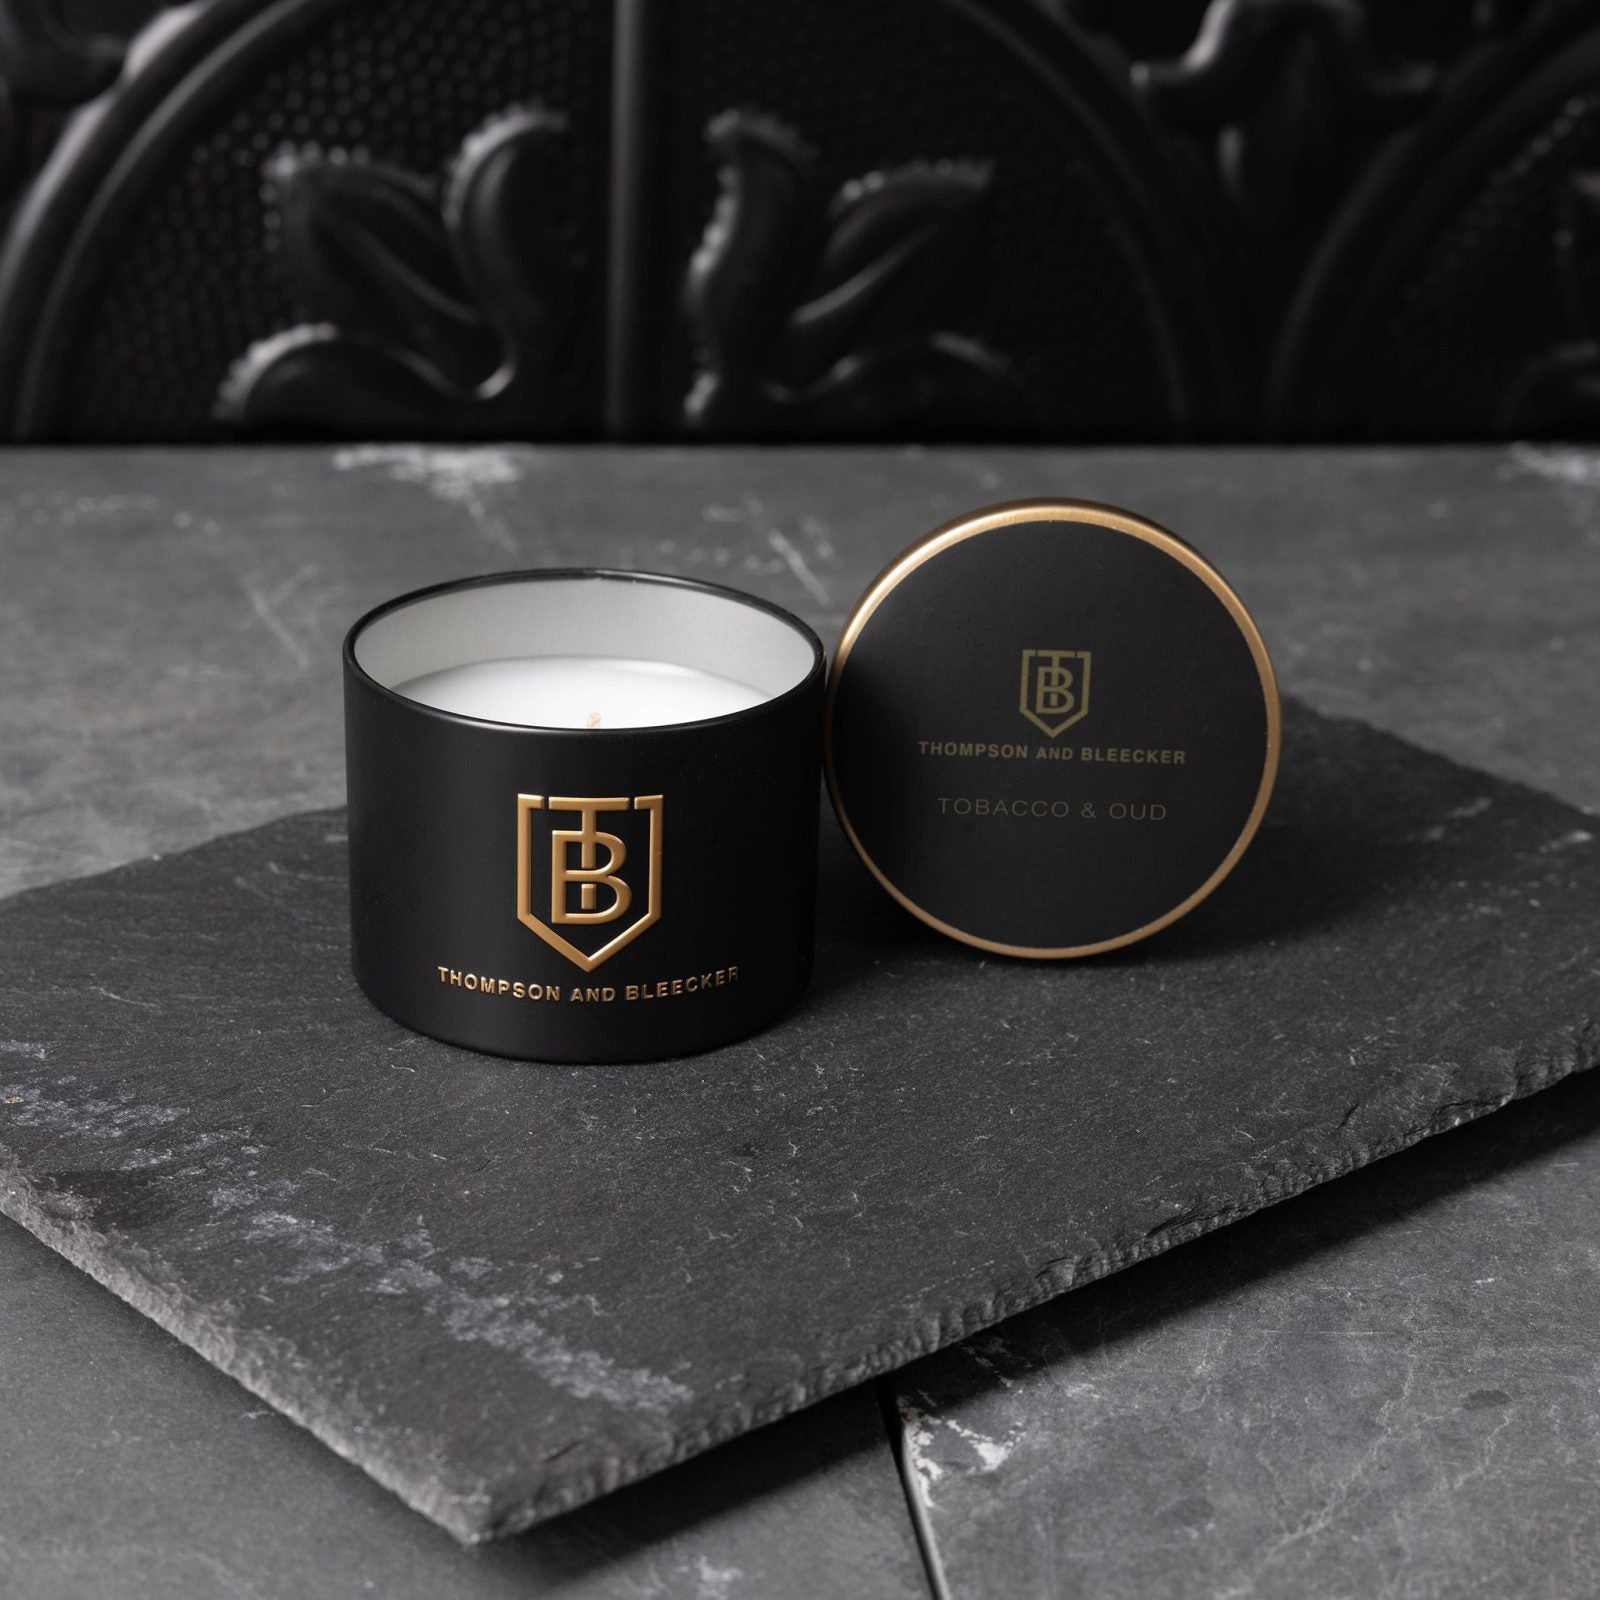 Tobacco & Oud Vintage Travel Tin Candle